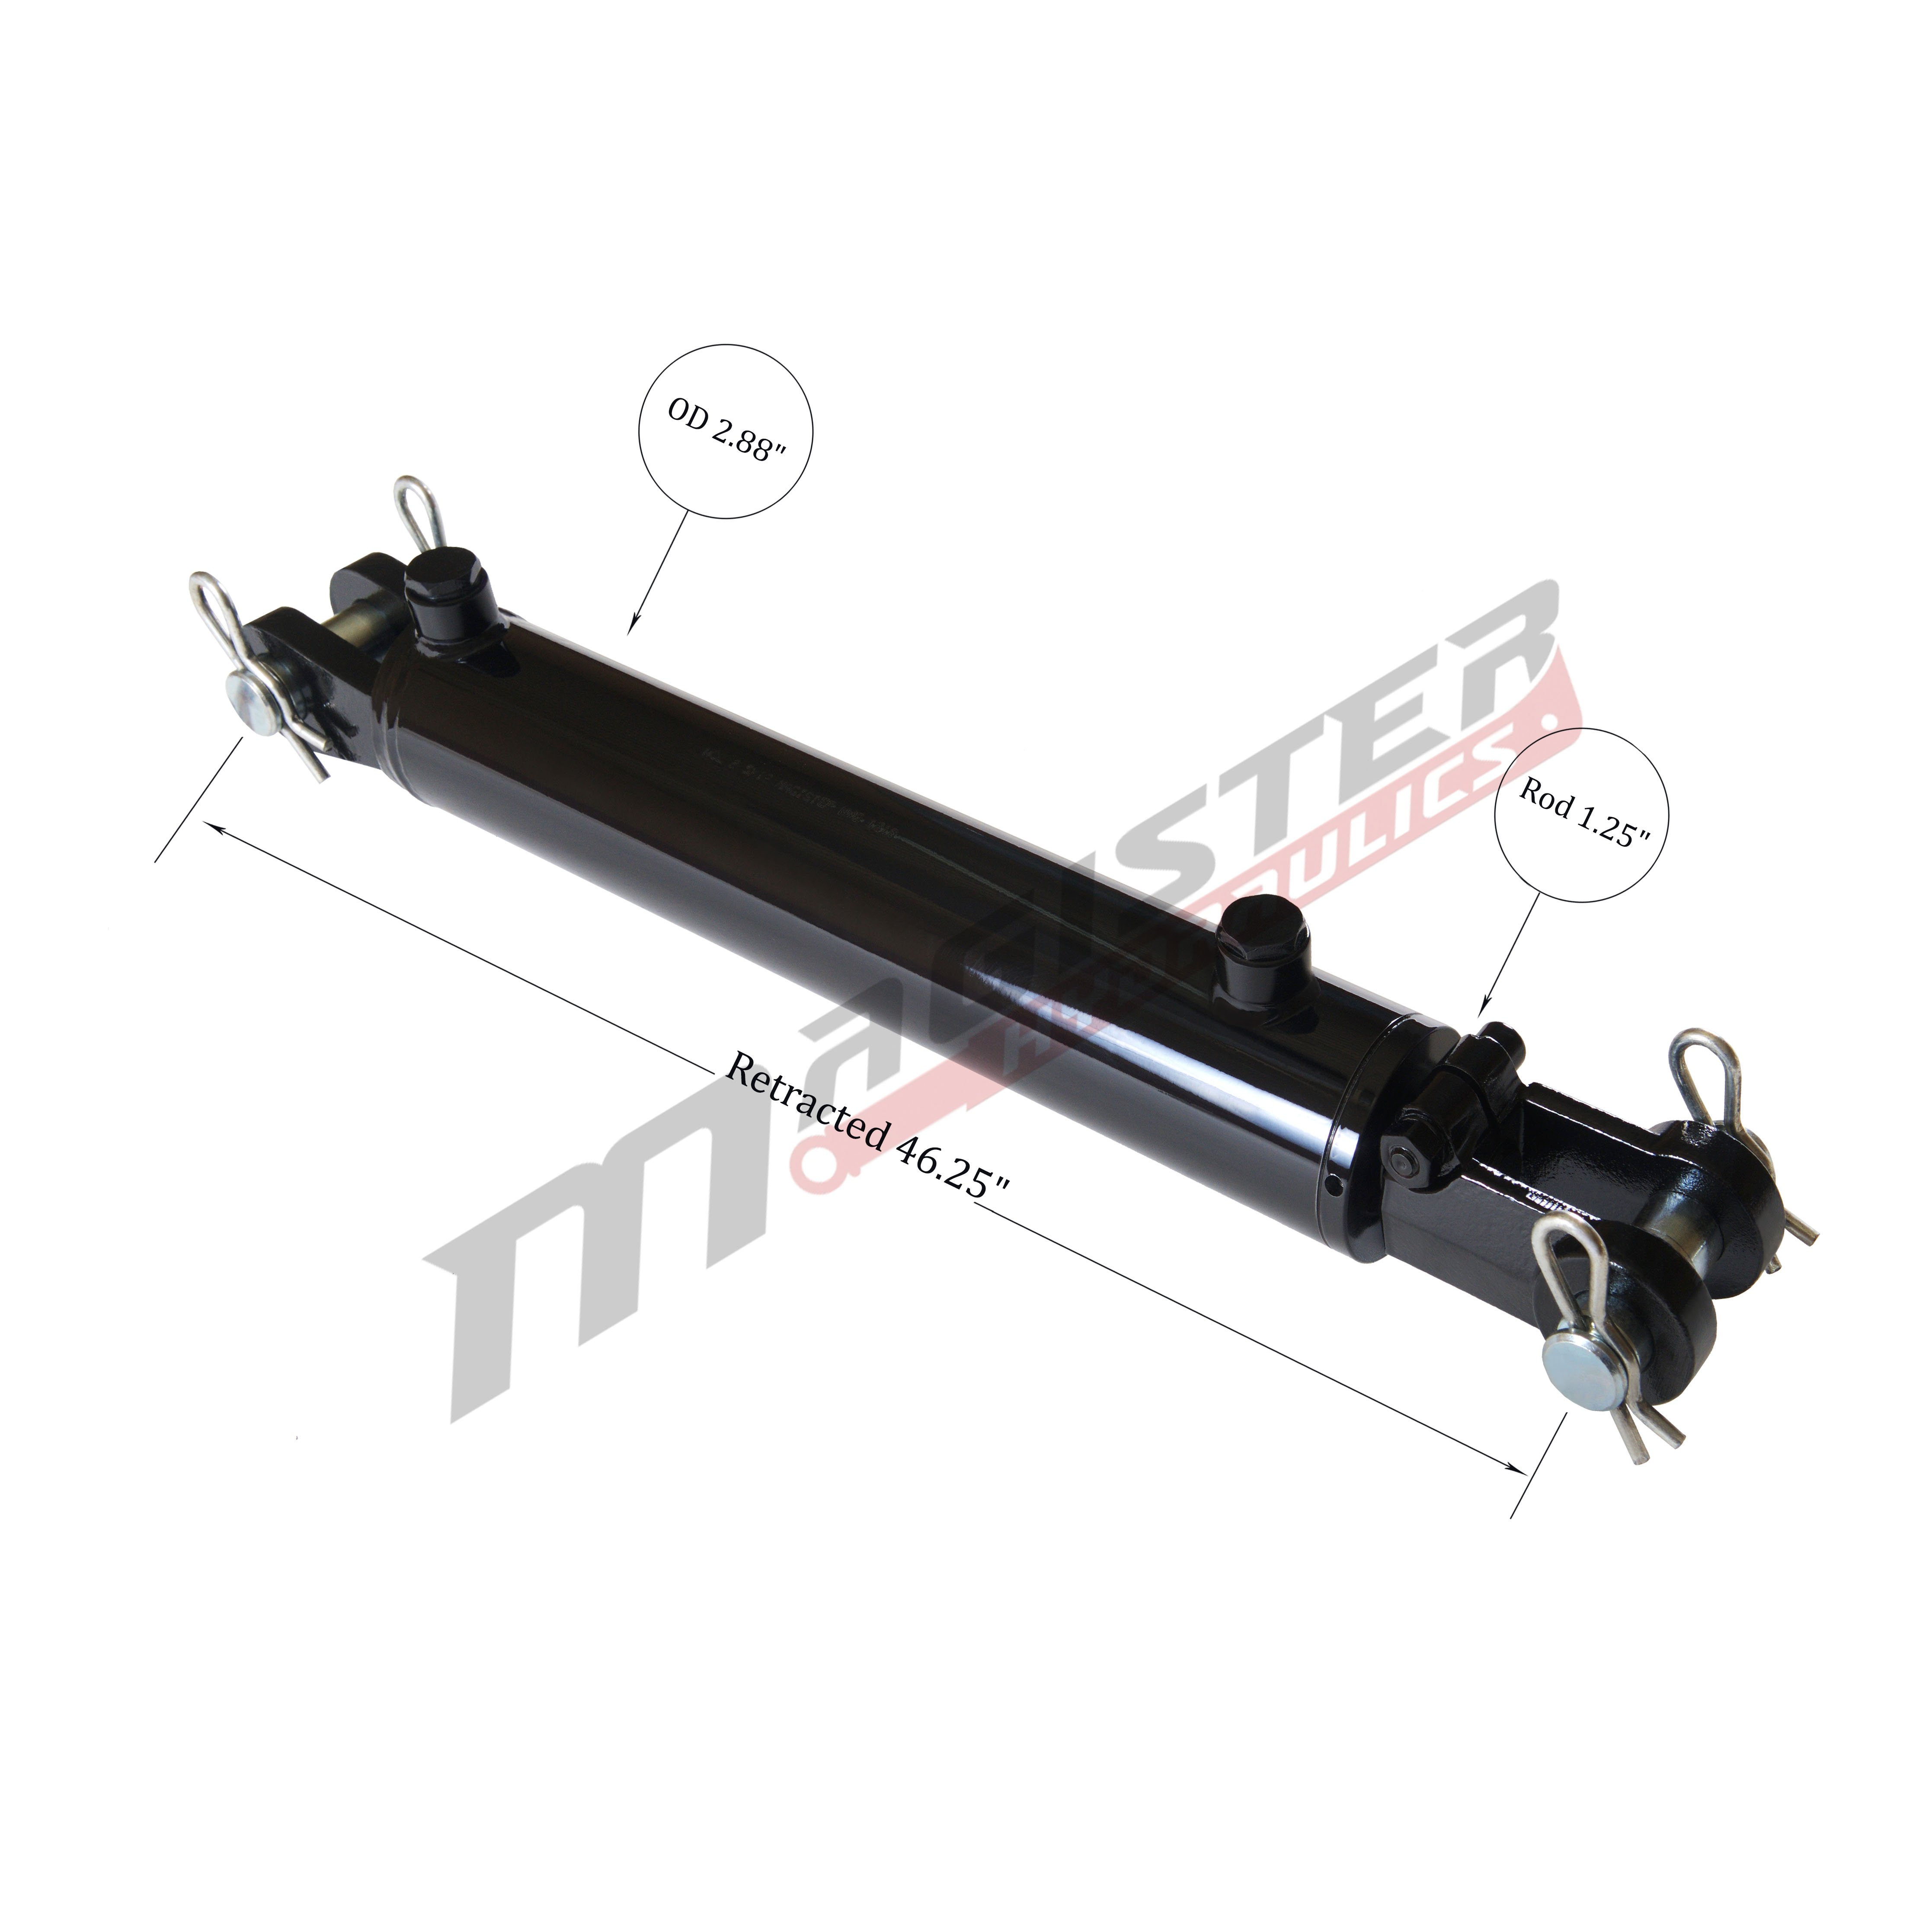 2.5 bore x 36 stroke hydraulic cylinder, welded clevis double acting cylinder | Magister Hydraulics